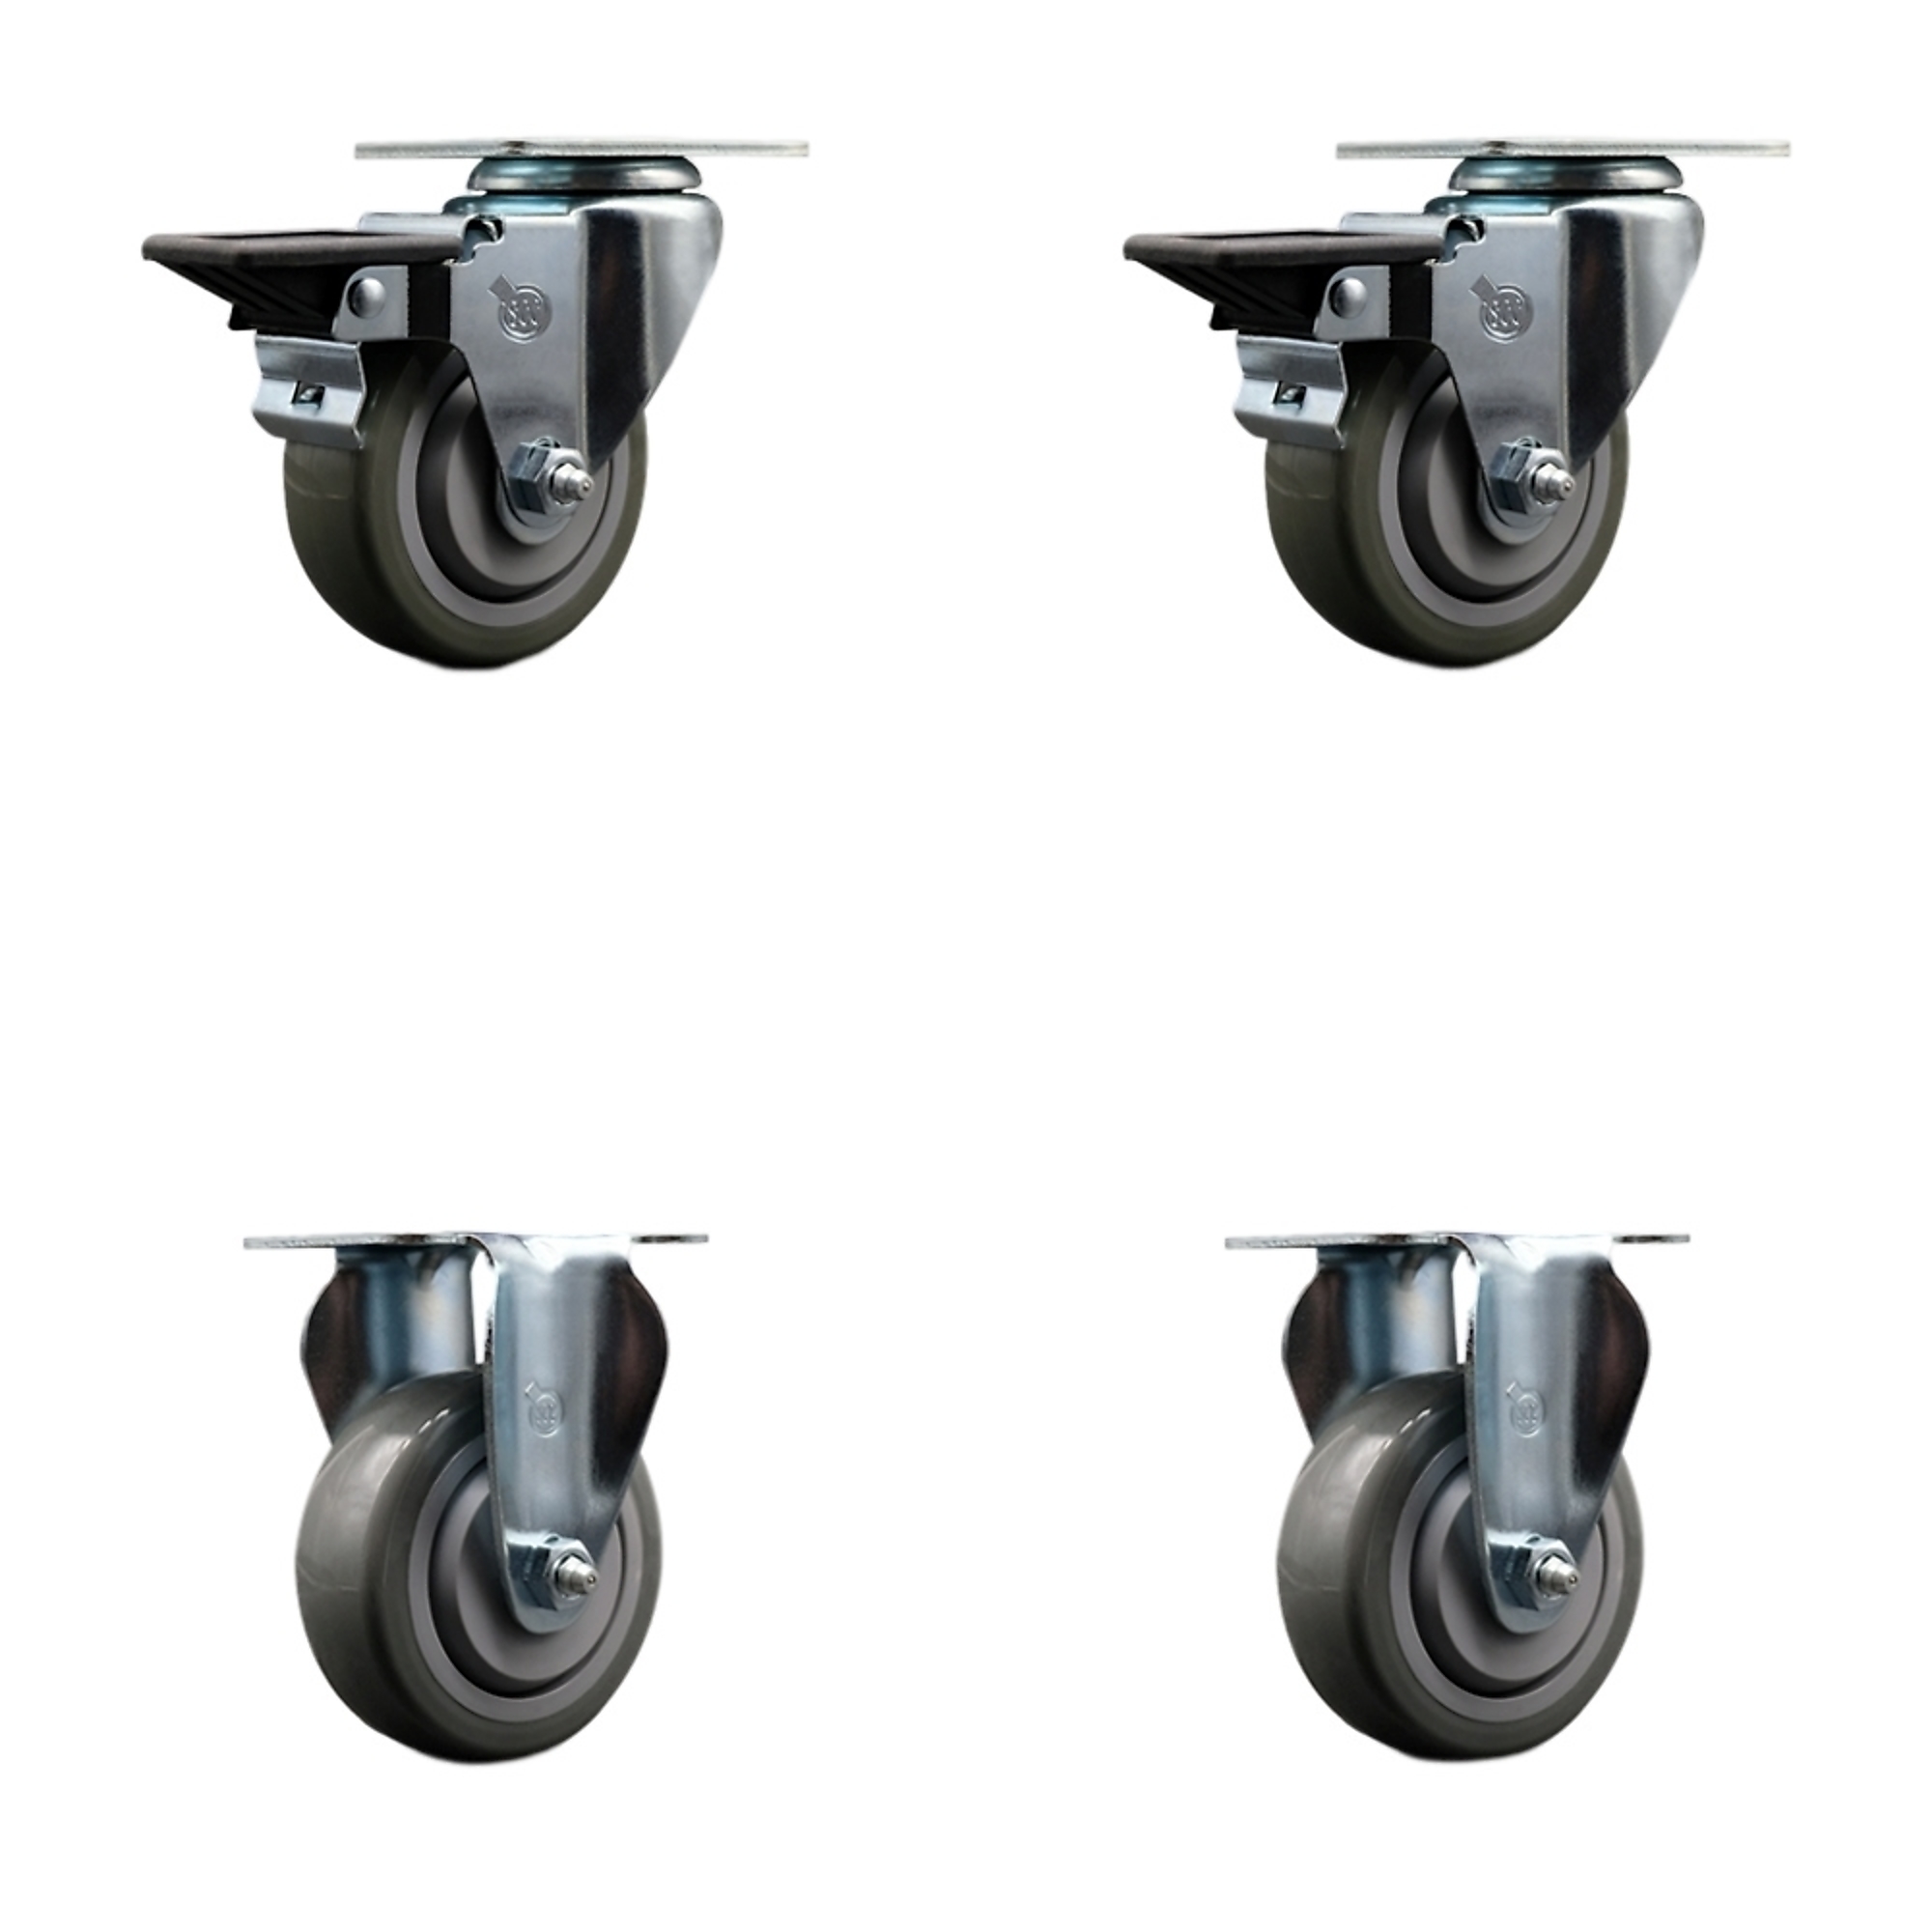 Service Caster, 3 1/2Inch x 1 1/4Inch Plate Casters, Wheel Diameter 3.5 in, Caster Type Swivel, Package (qty.) 4, Model SCC-20S3514-PPUB-PLB-2-R-2